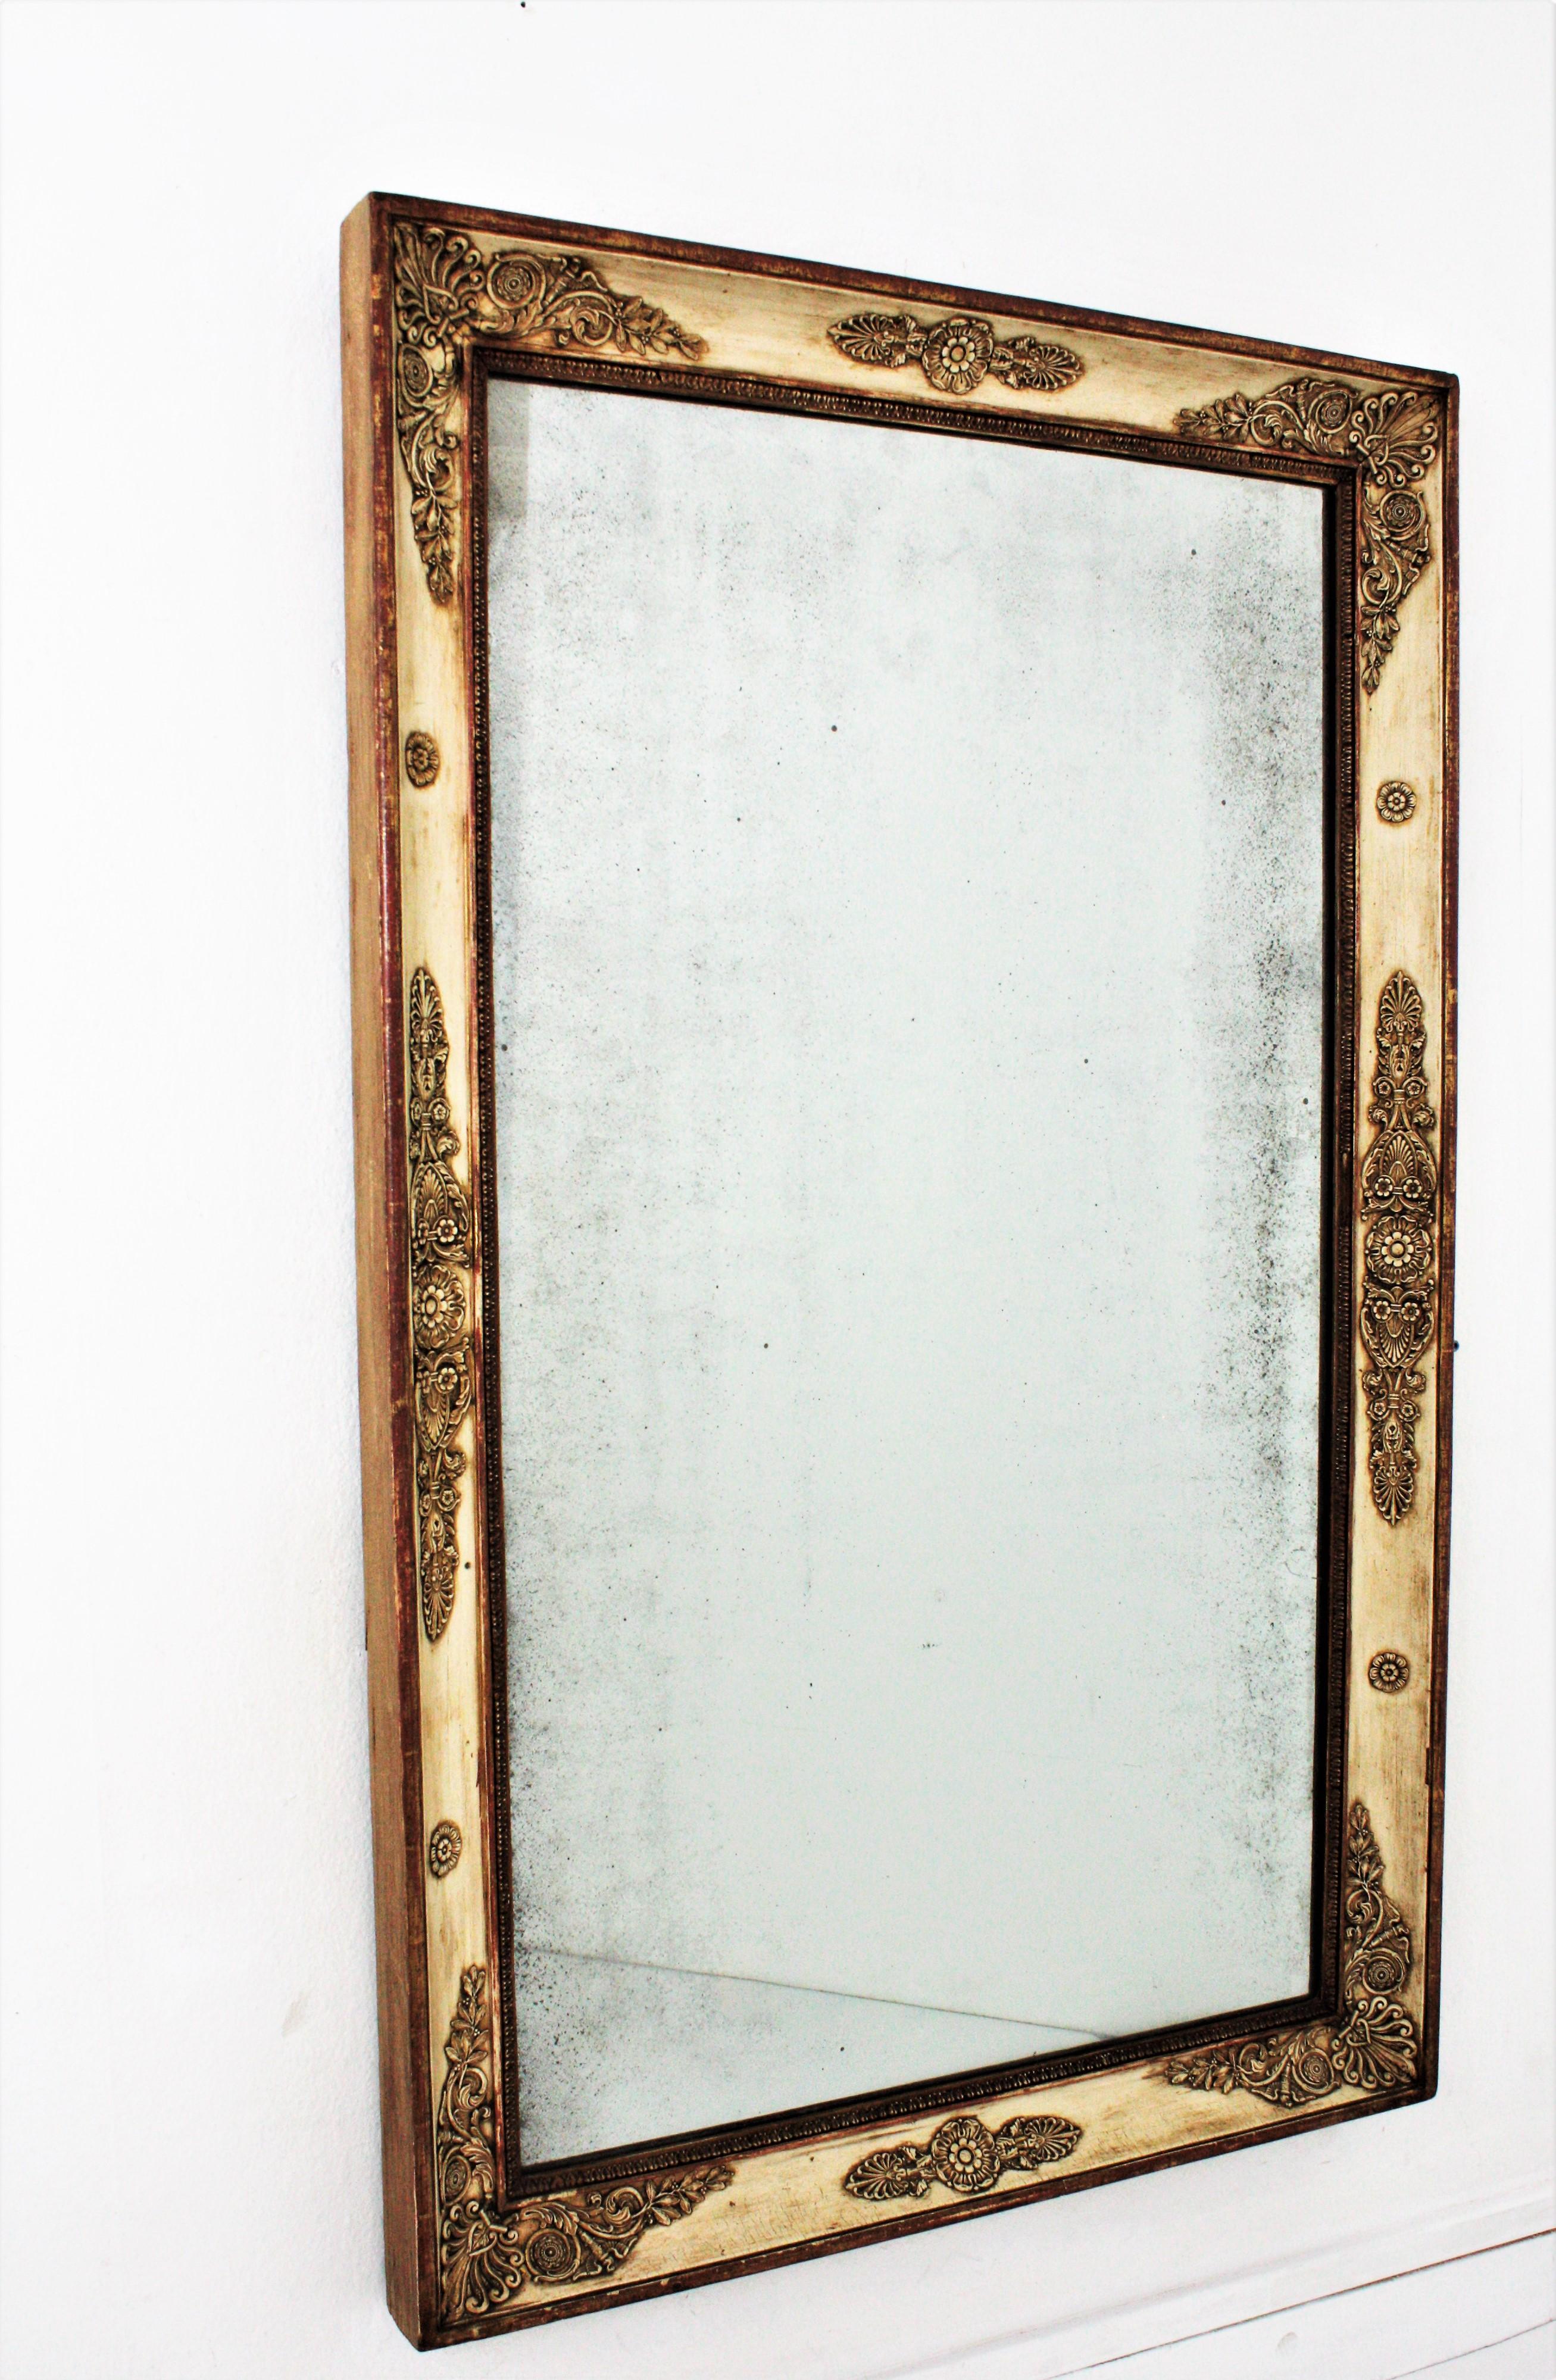 Gesso Large French Empire Parcel-Gilt and Beige Rectangular Mirror For Sale